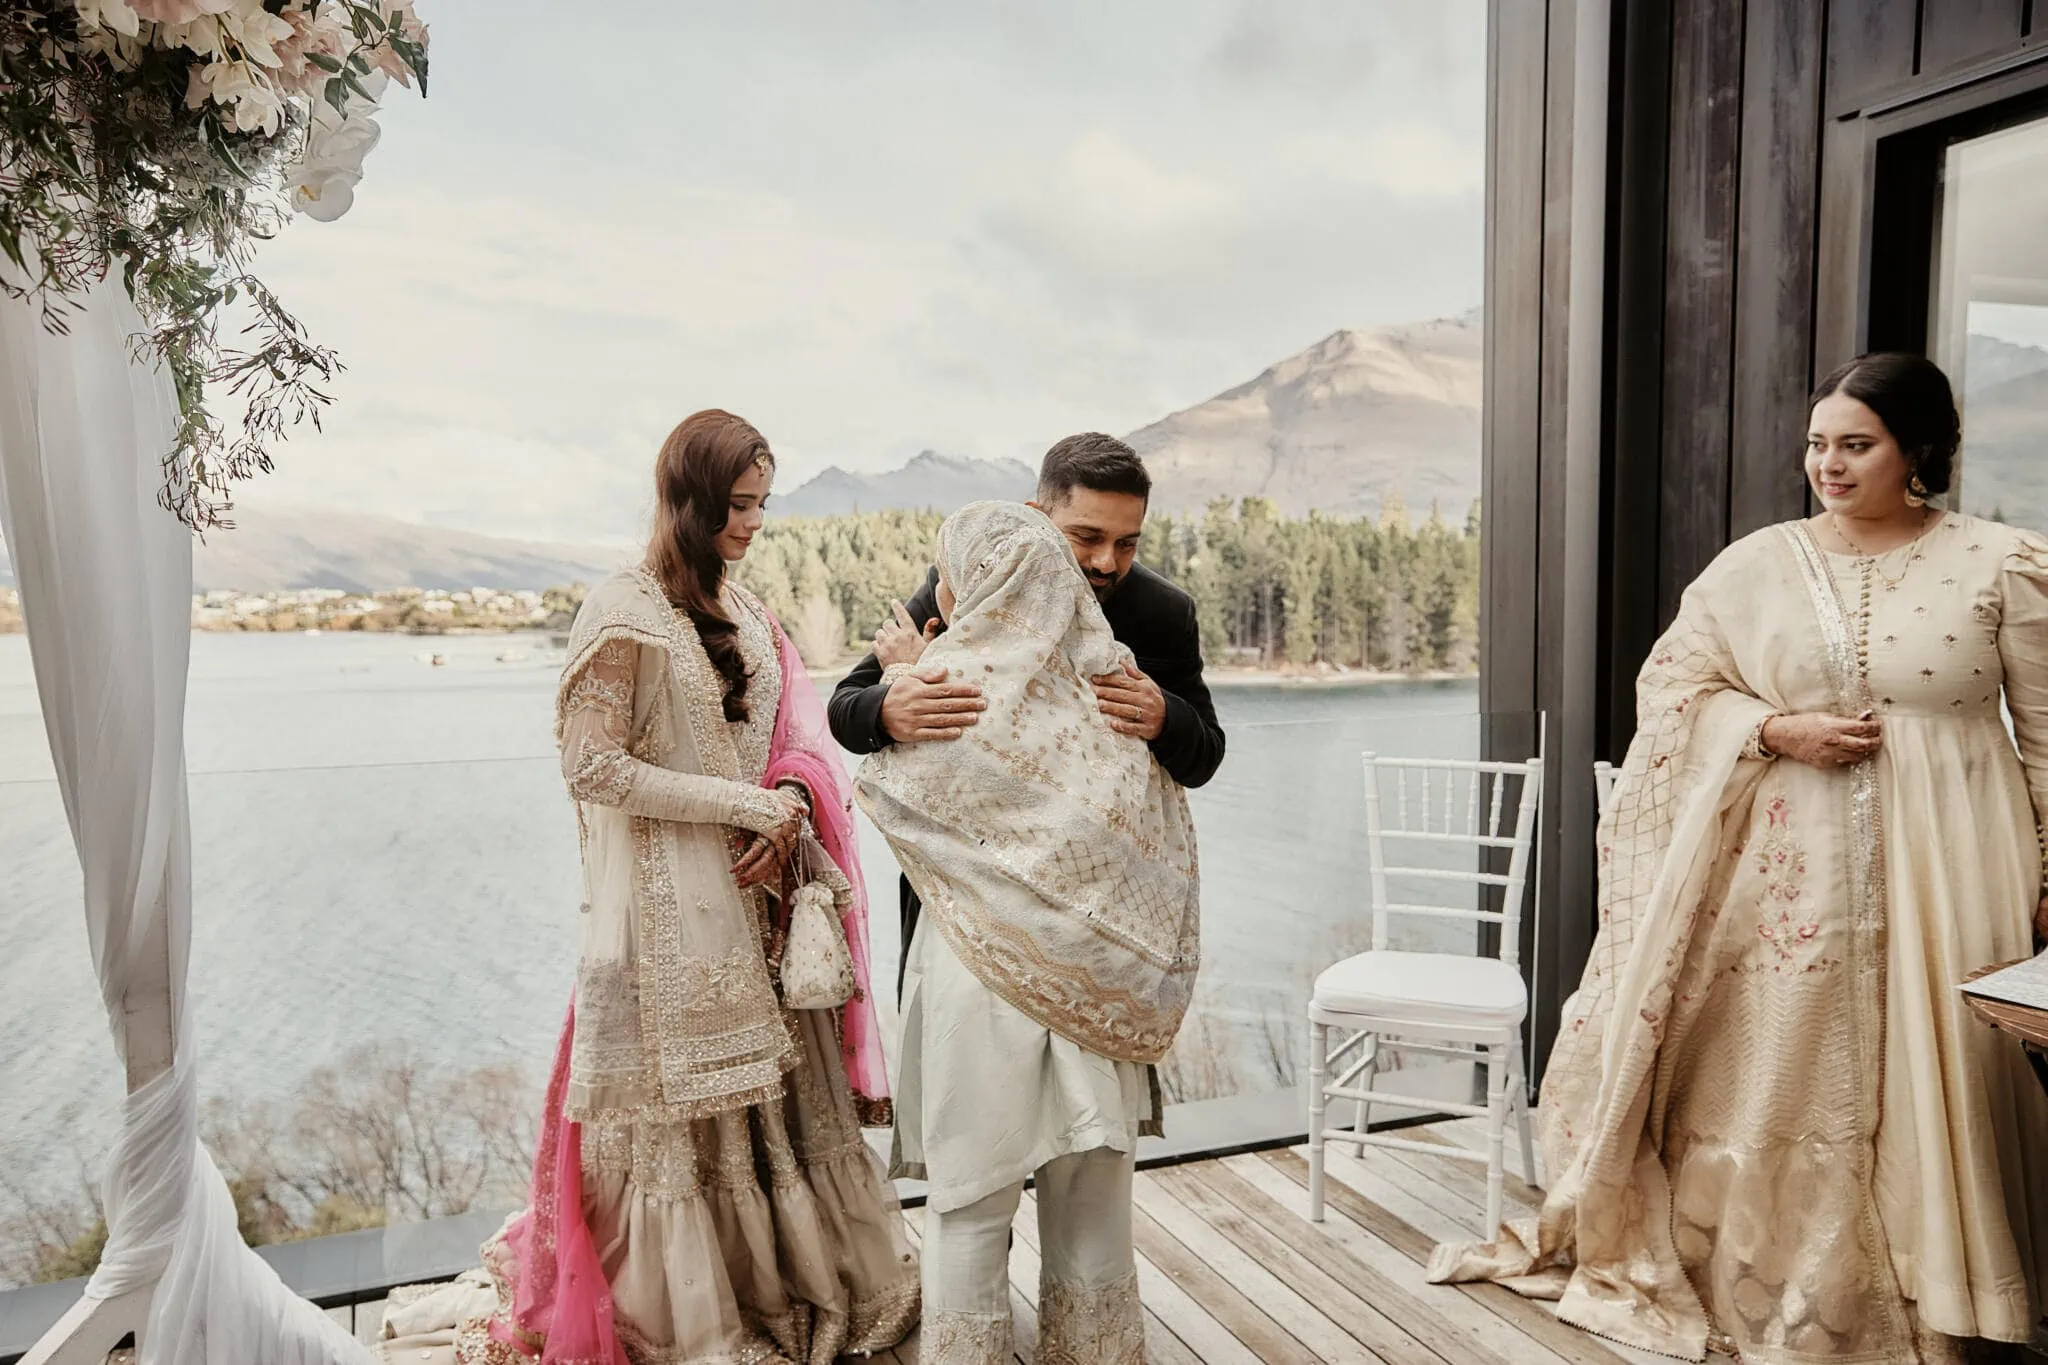 Queenstown New Zealand Elopement Wedding Photographer - Wasim and Yumn's Queenstown Islamic Wedding, with the bride and groom hugging in front of a lake in New Zealand.